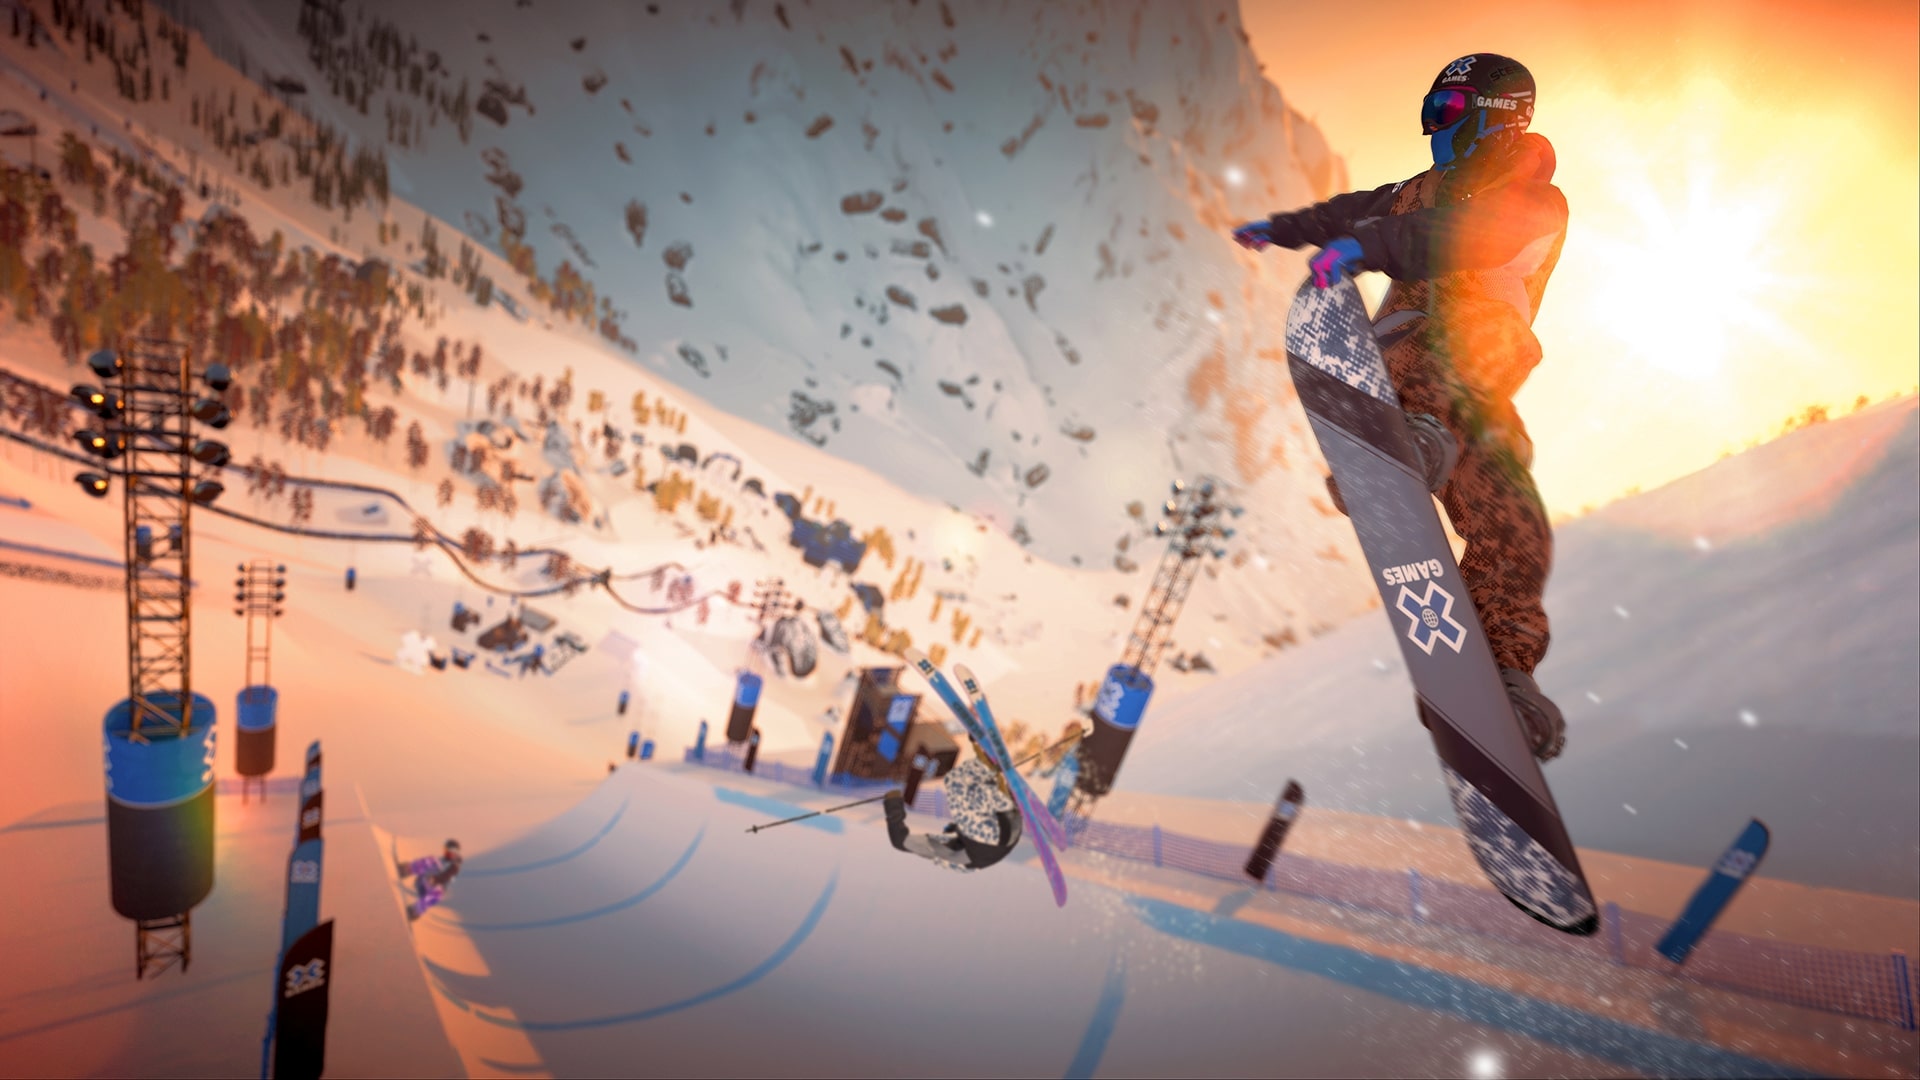 steep ps4 game